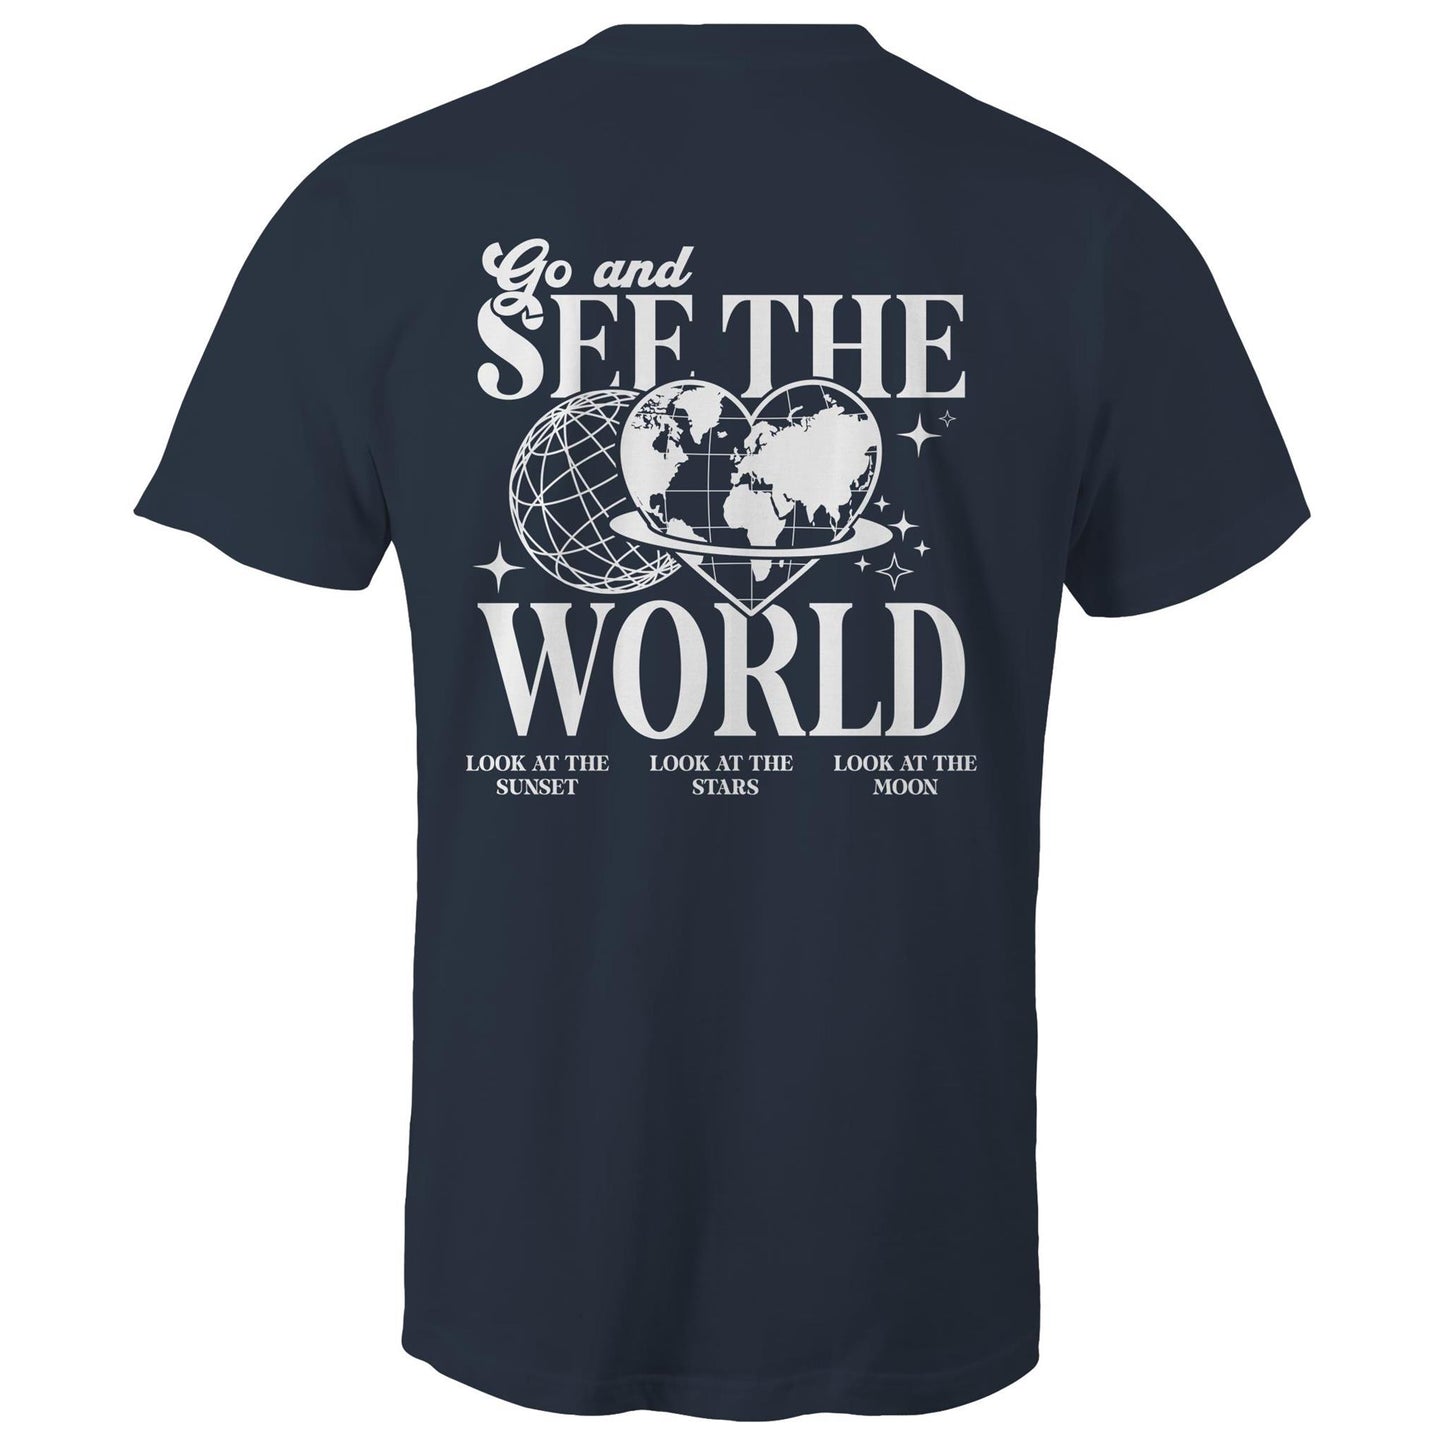 Mens T-Shirt - Go See The World